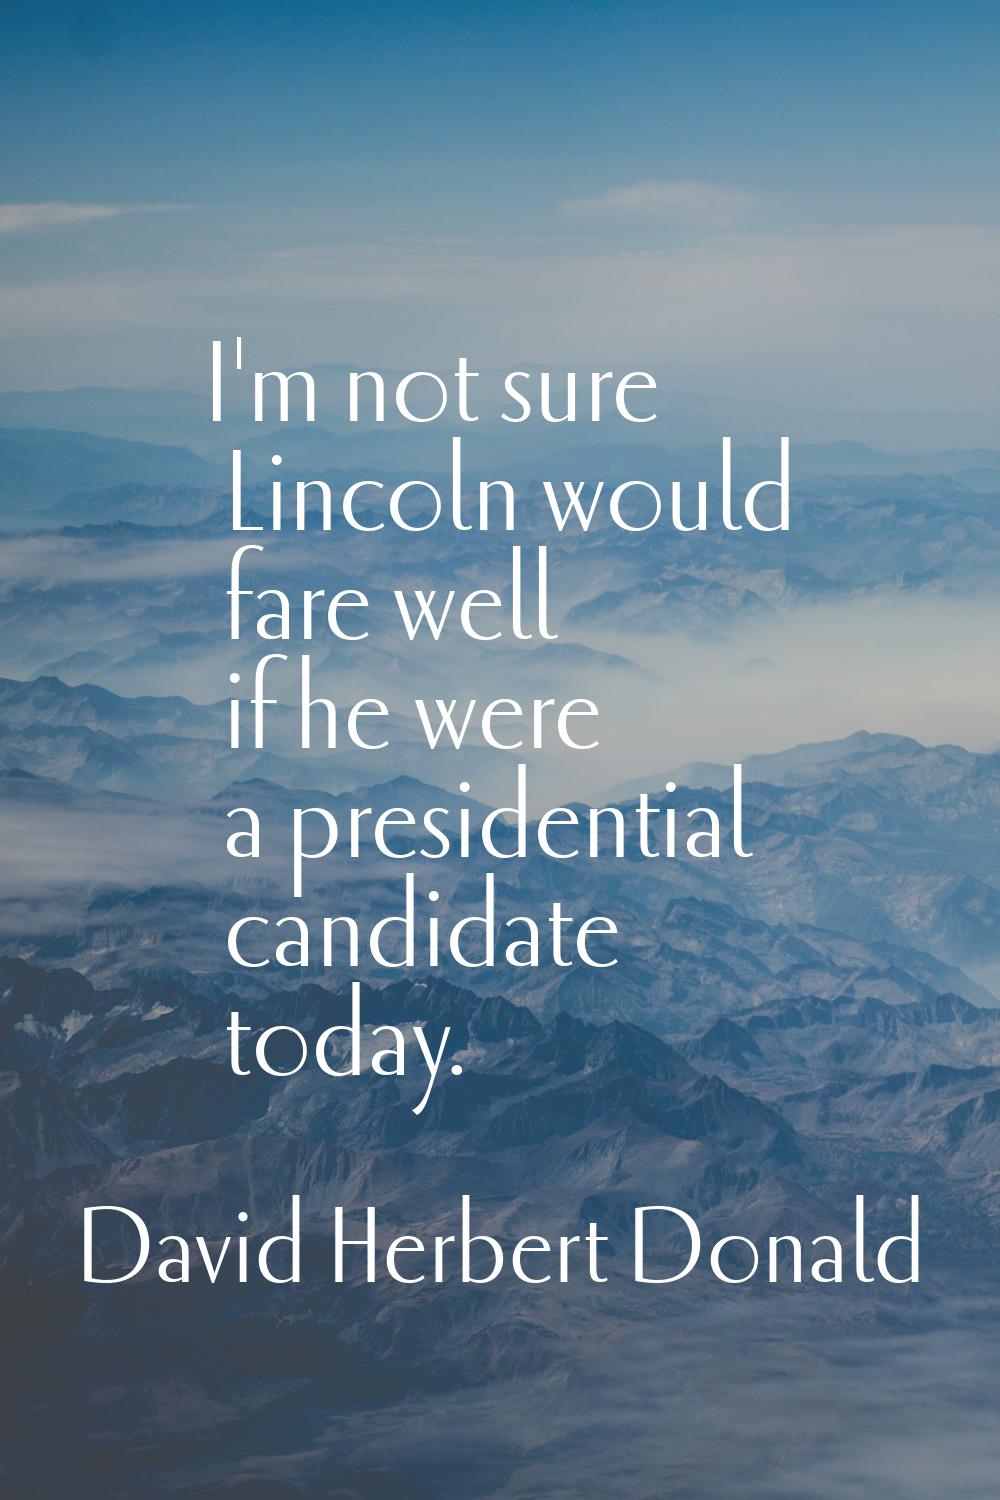 I'm not sure Lincoln would fare well if he were a presidential candidate today.